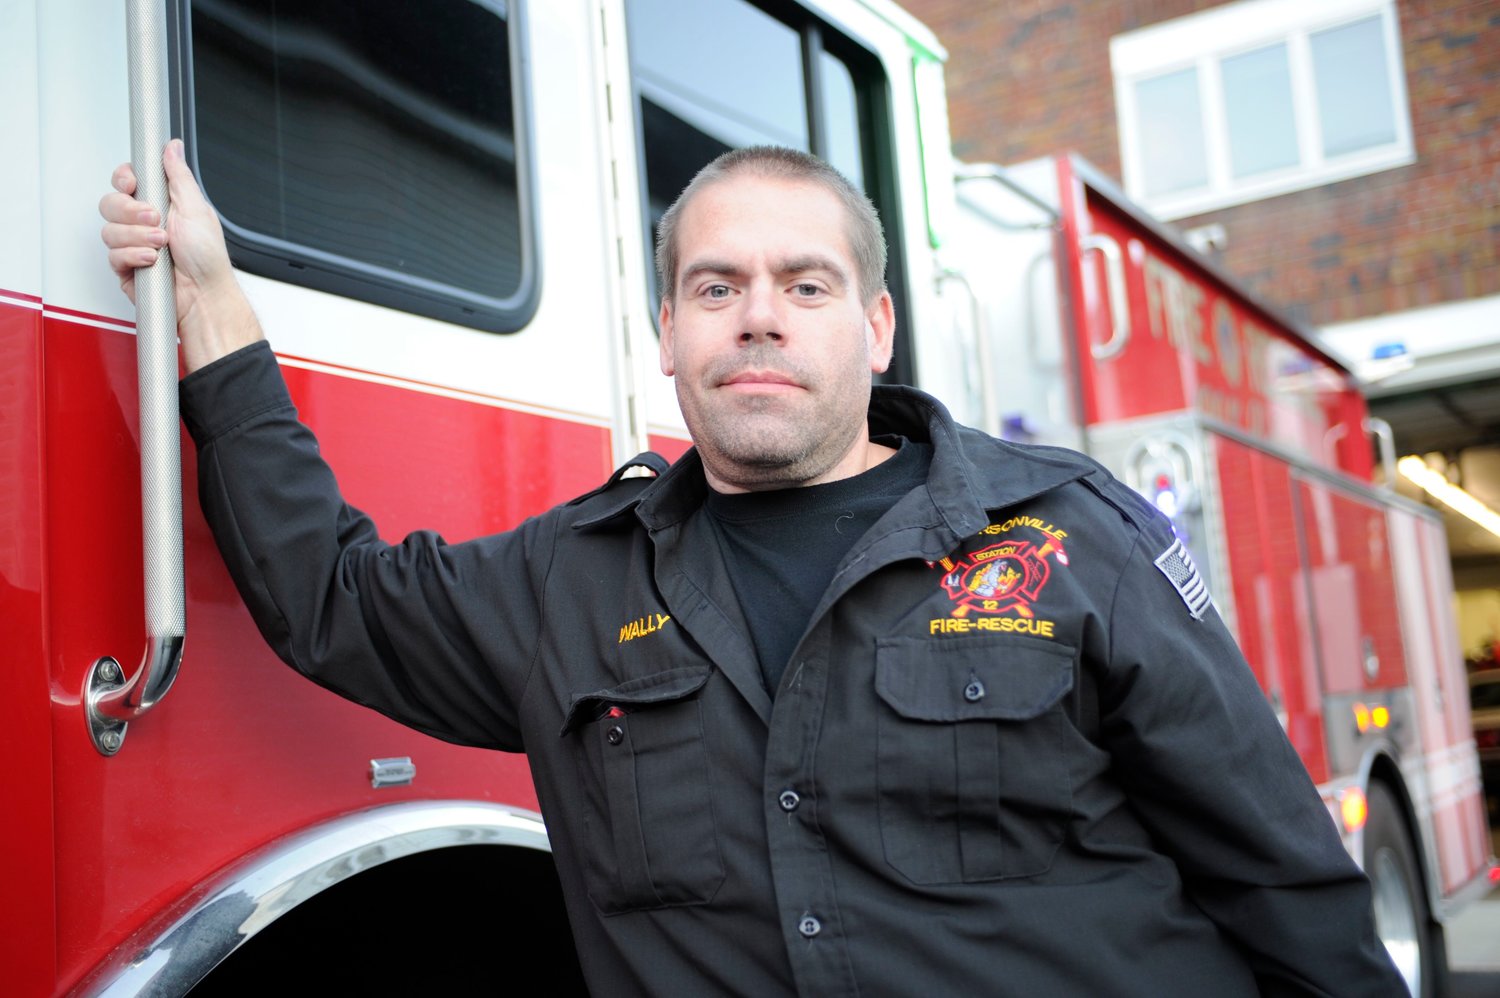 Scott “Wally” McGowan serves as chief of the Jeffersonville Volunteer Fire Department Protection Hose Co. No 1. He joined the department as a 16-year-old in 1993, two years before graduating high school.